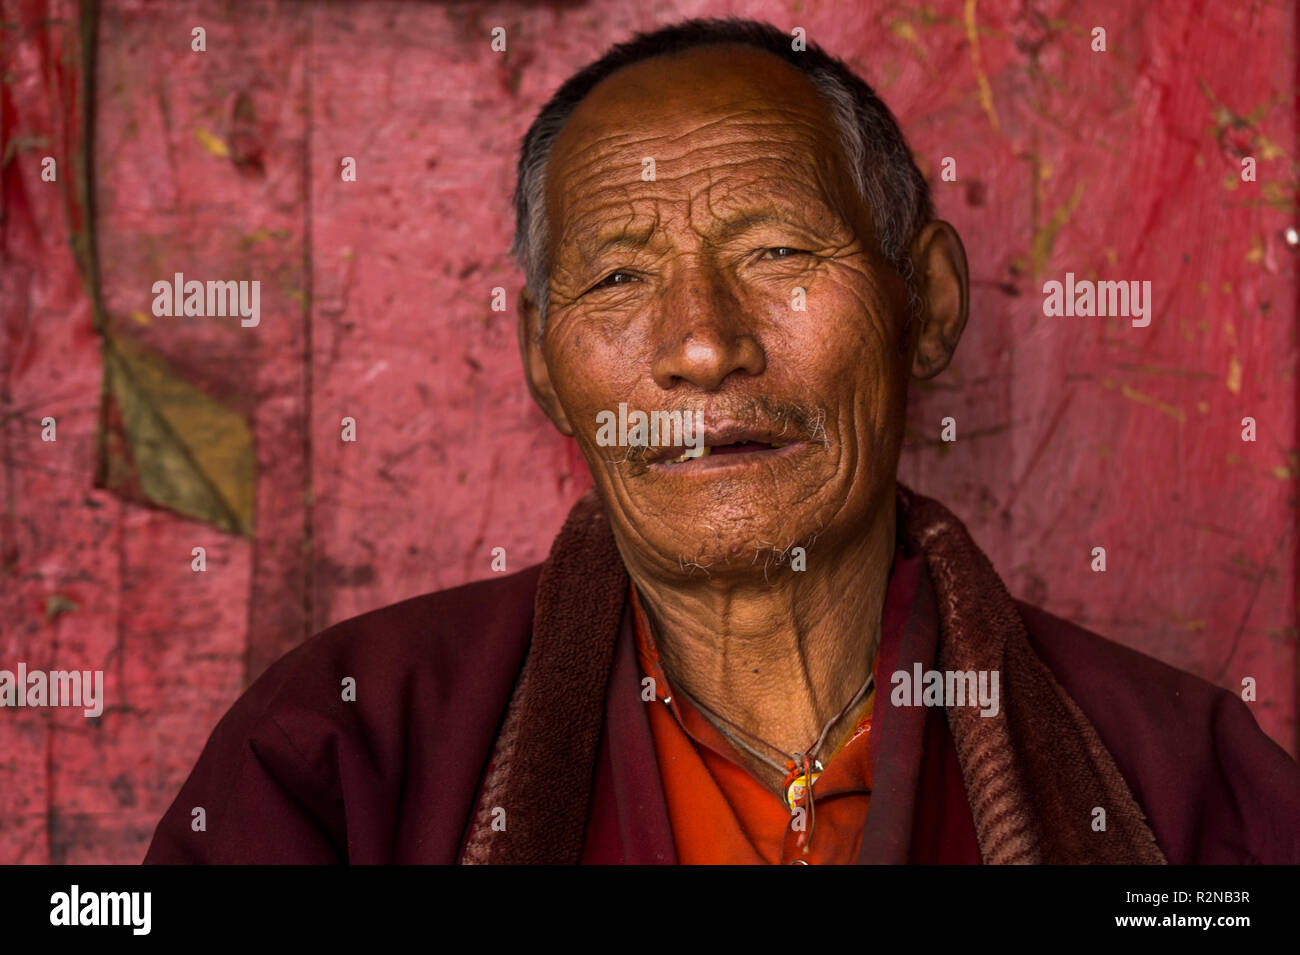 Monk in the monastery Drigung Thel, portrait Stock Photo